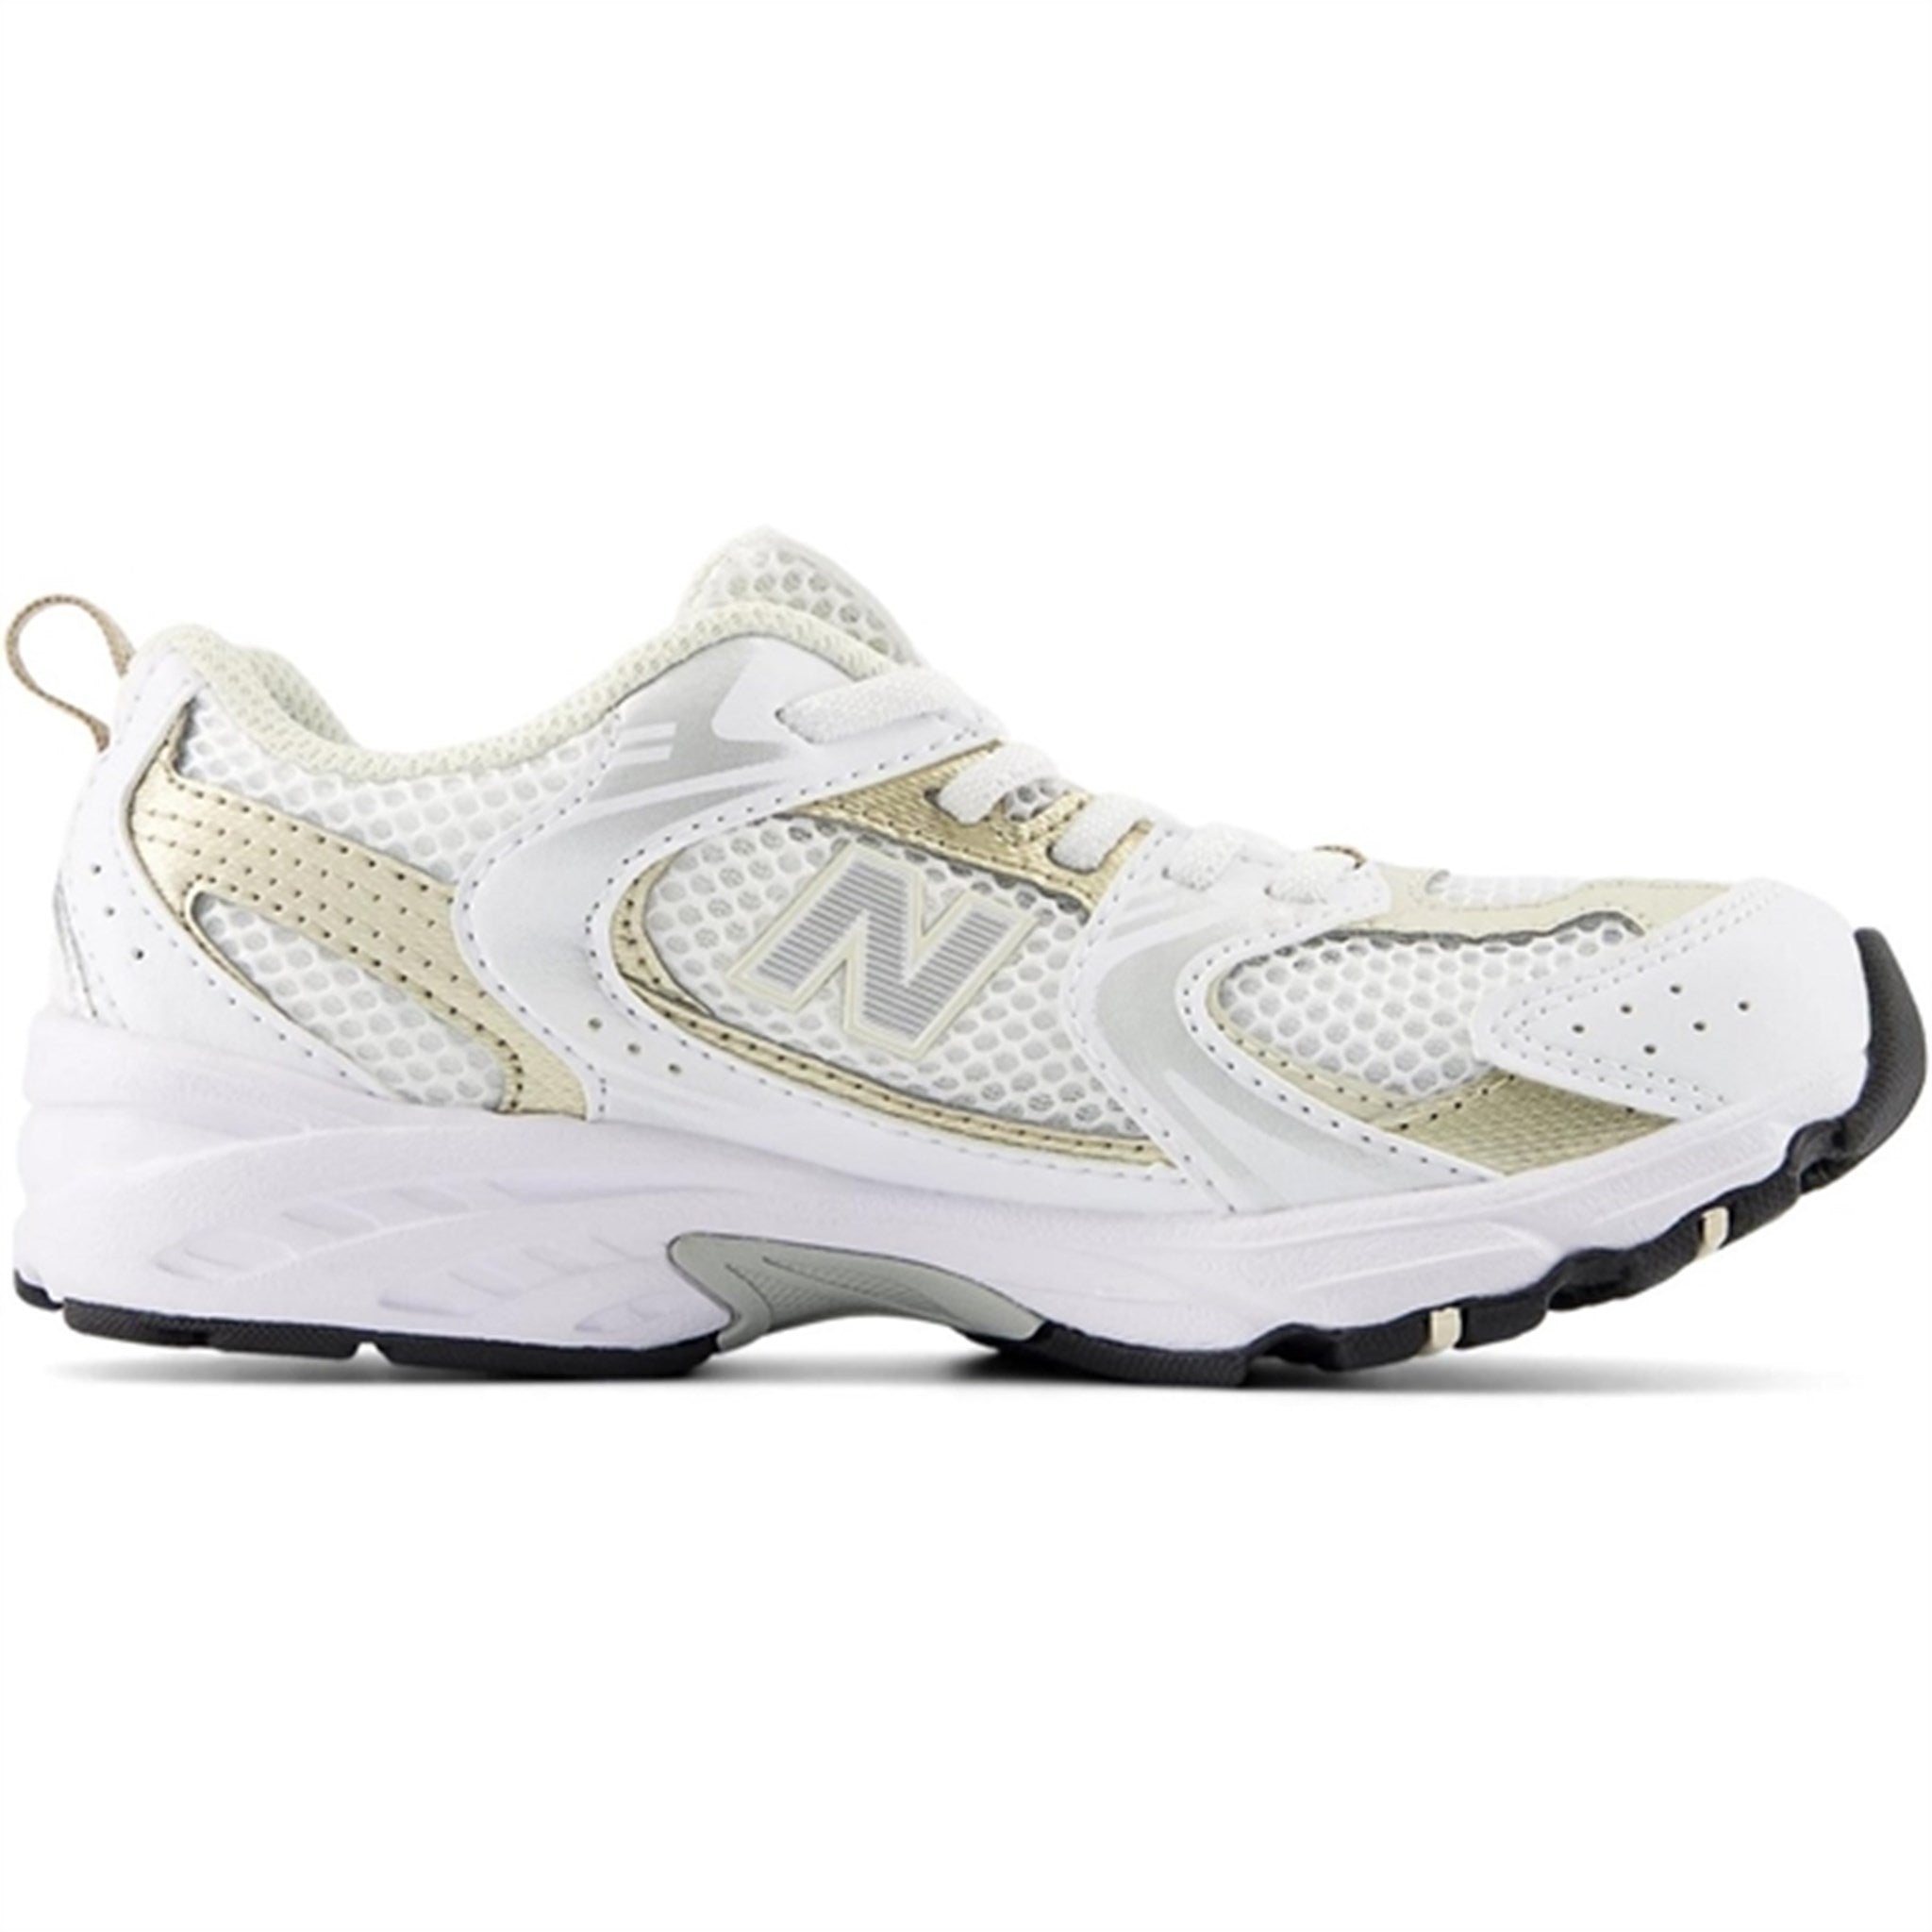 New Balance 530 Kids Bungee Lace Sneakers White